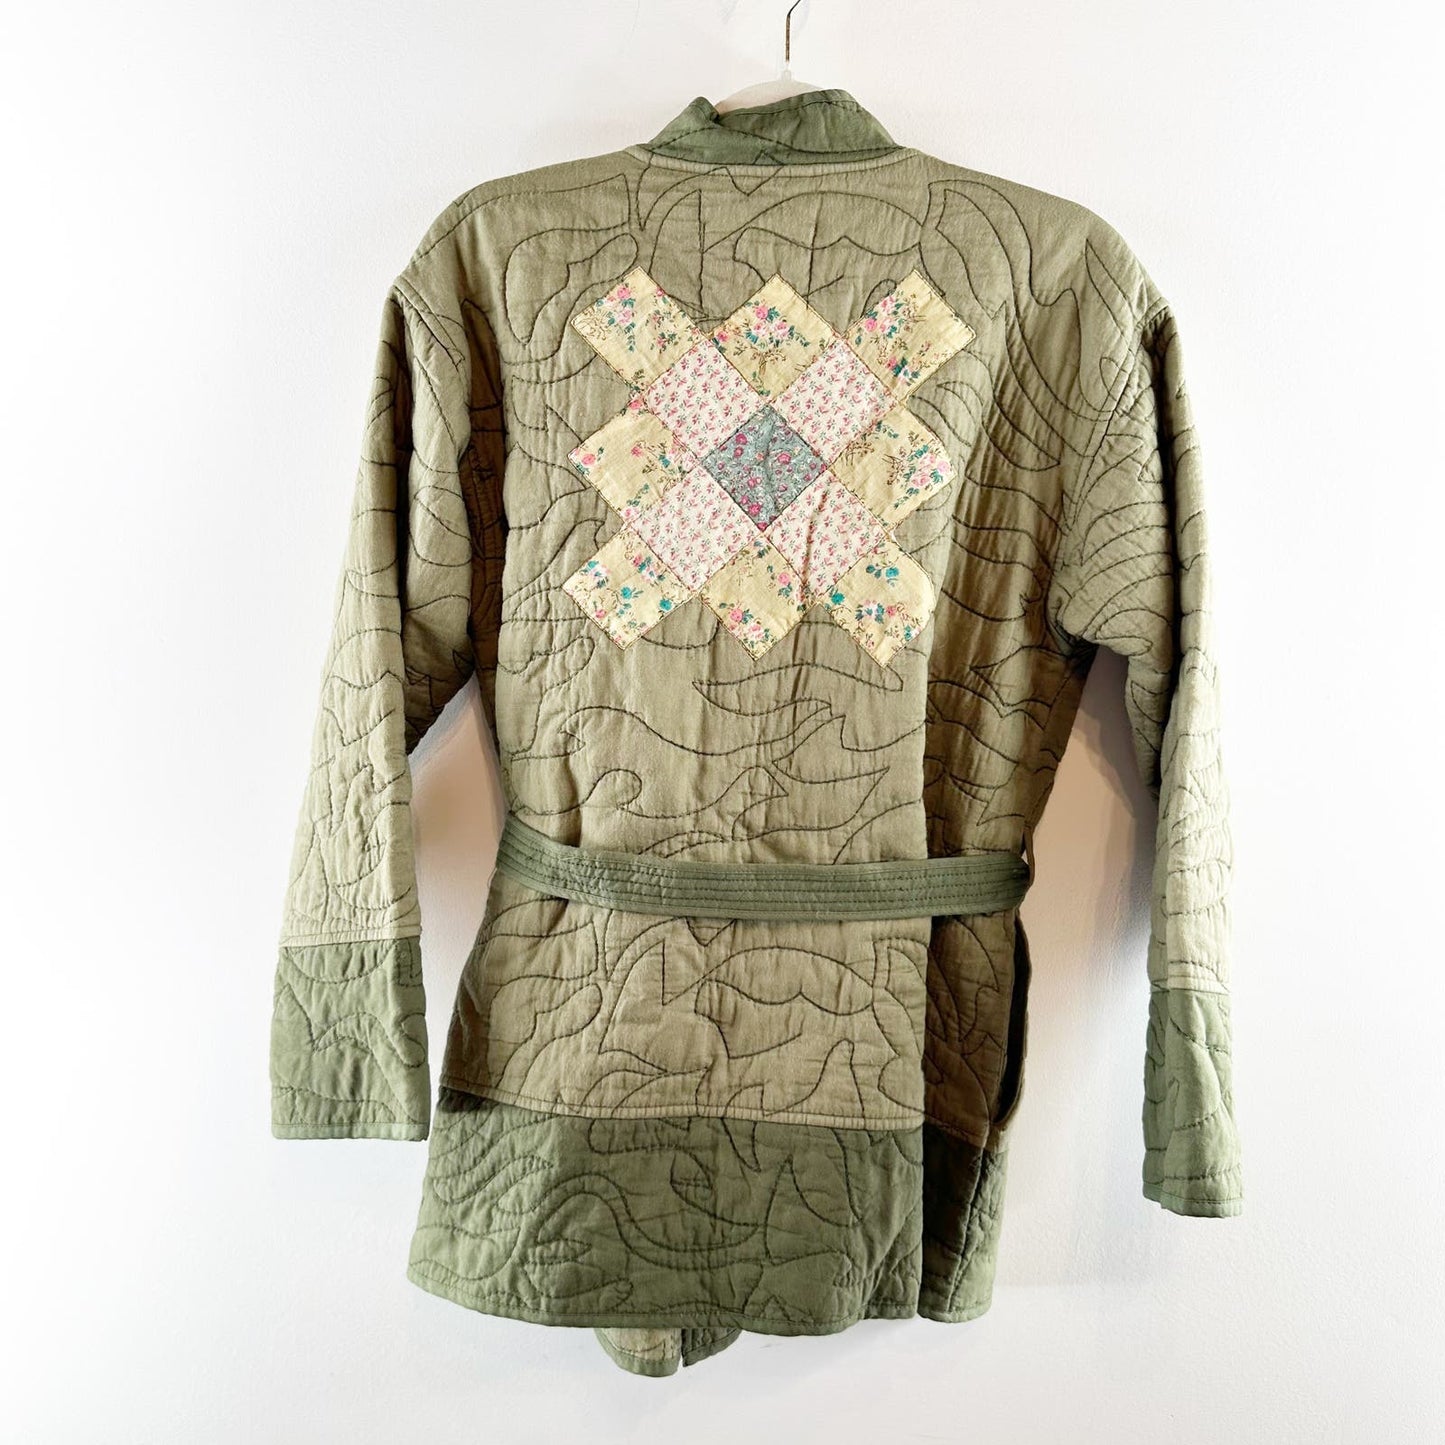 Anthropologie Quilted Kimono Patchwork Wrap Belted Jacket Green Small